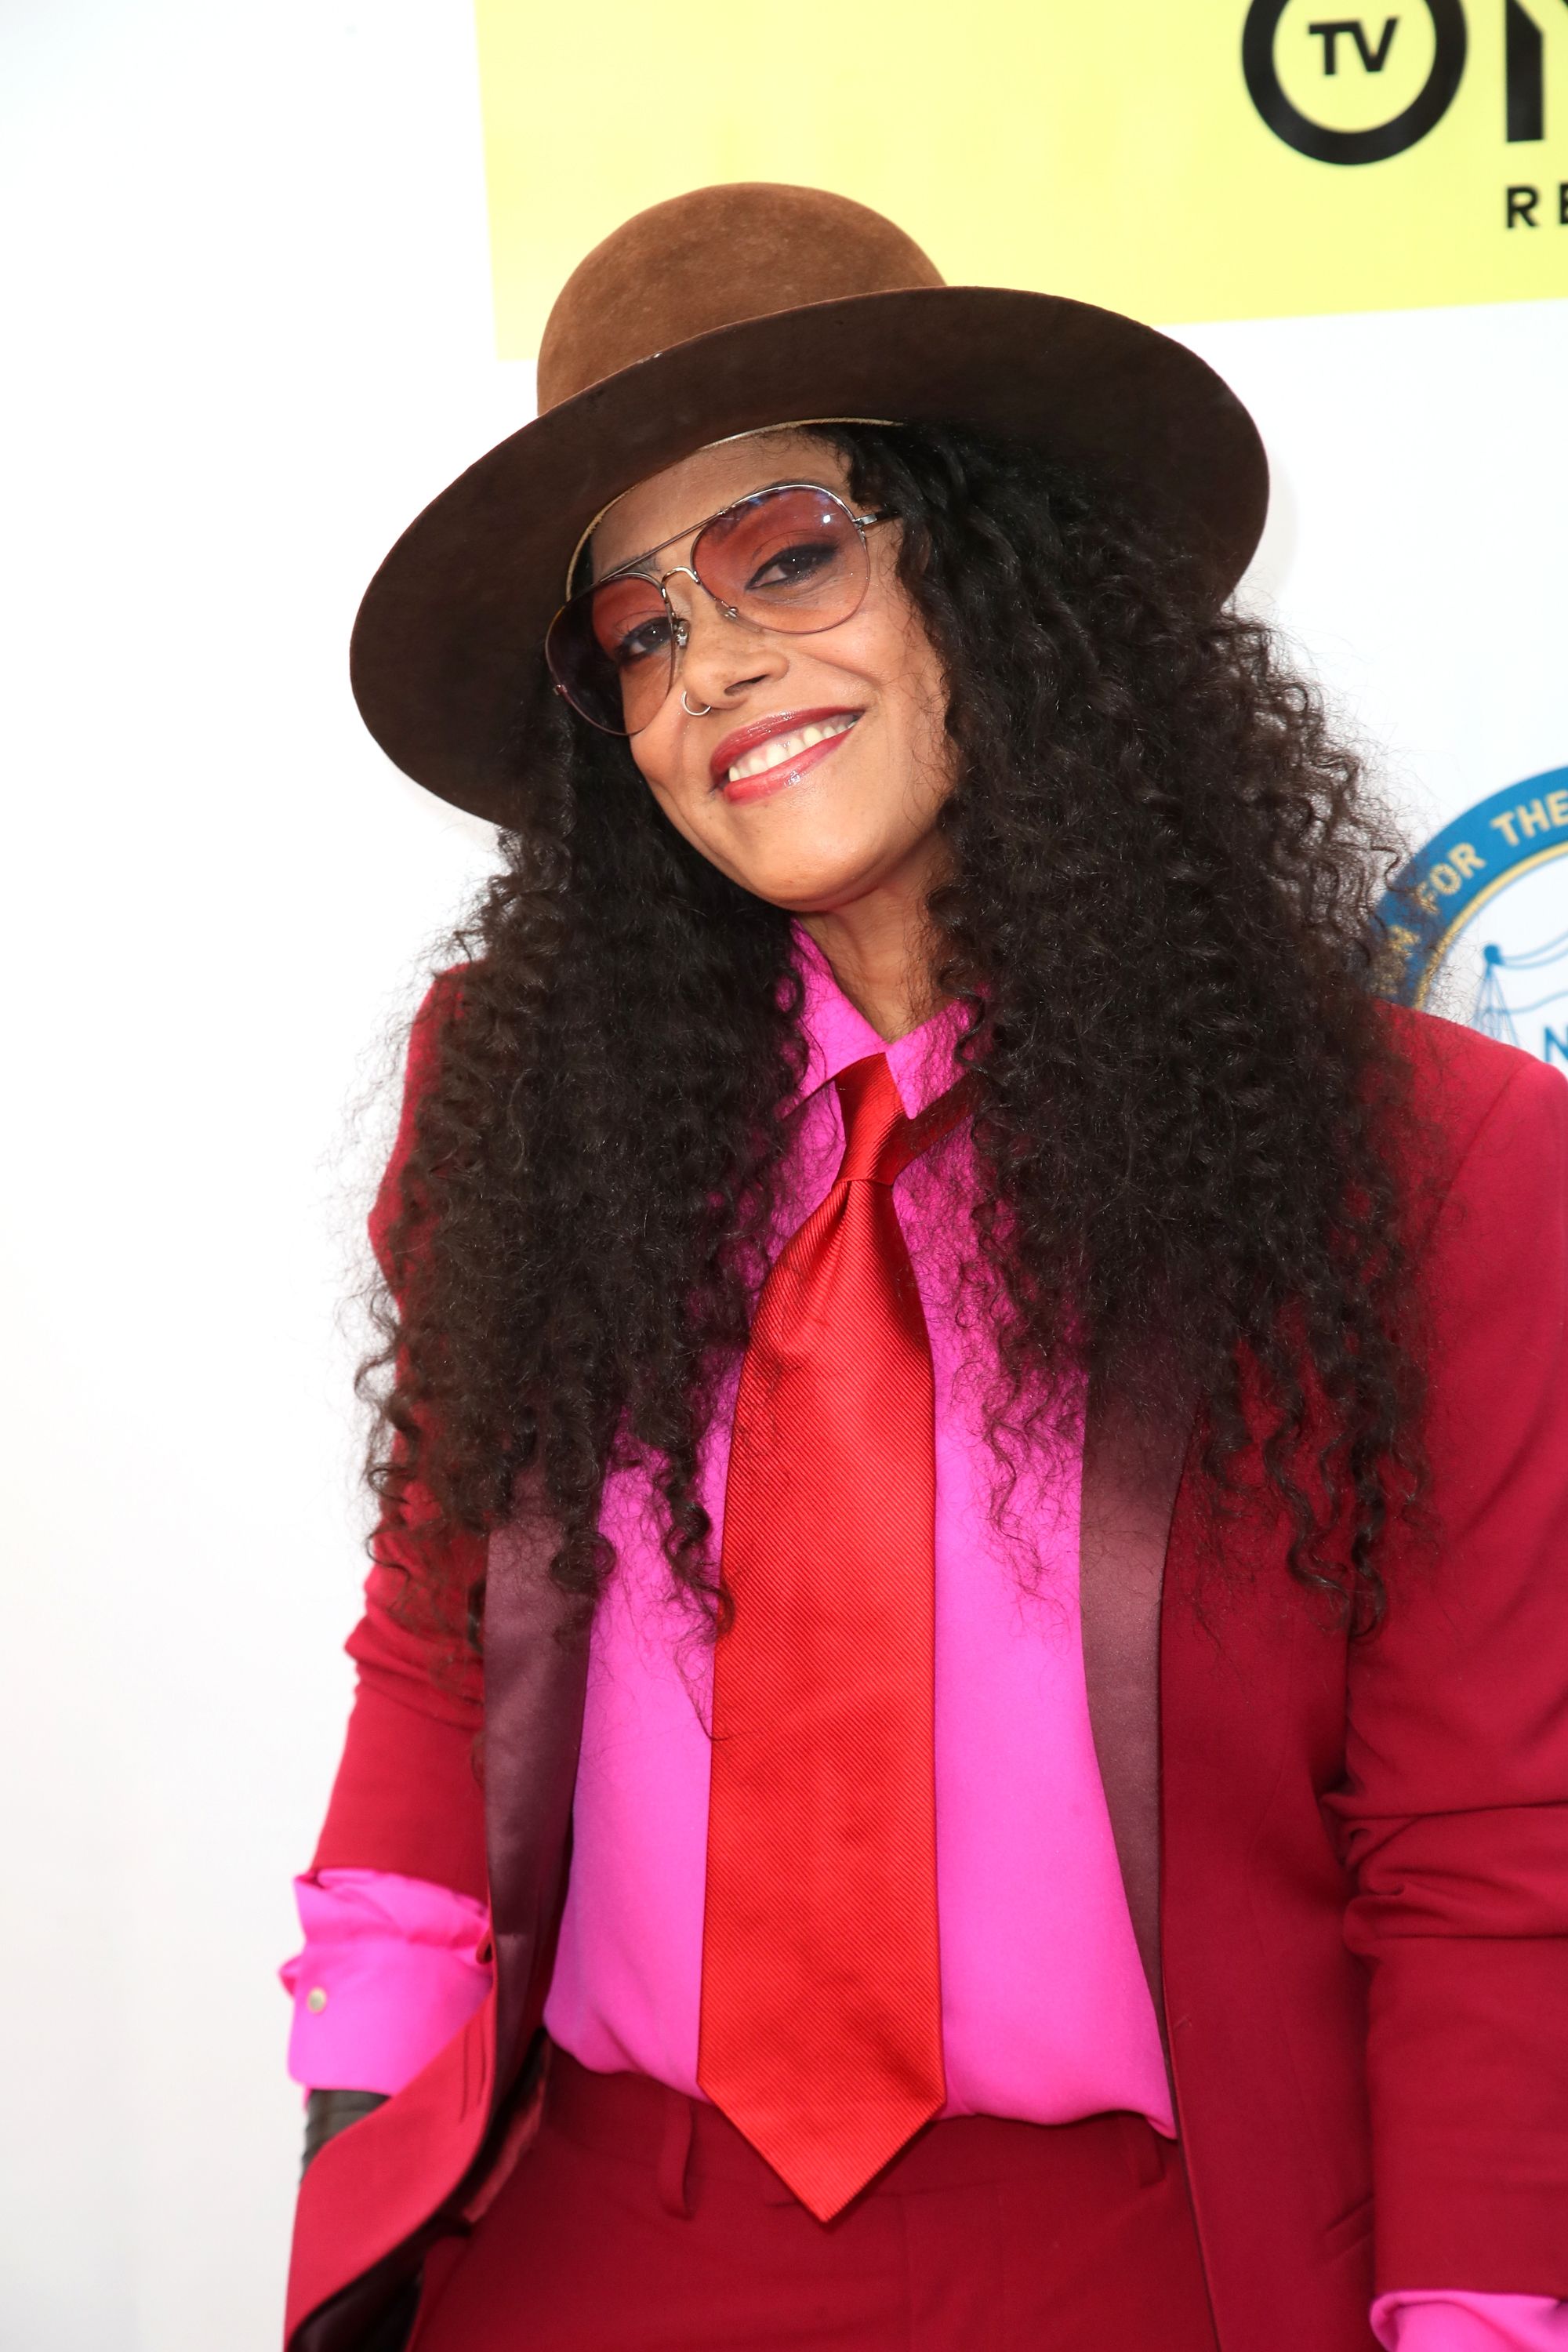 Voice actress Cree Summer at the NAACP Image Awards on February 11, 2017 in California. | Photo: Getty Images